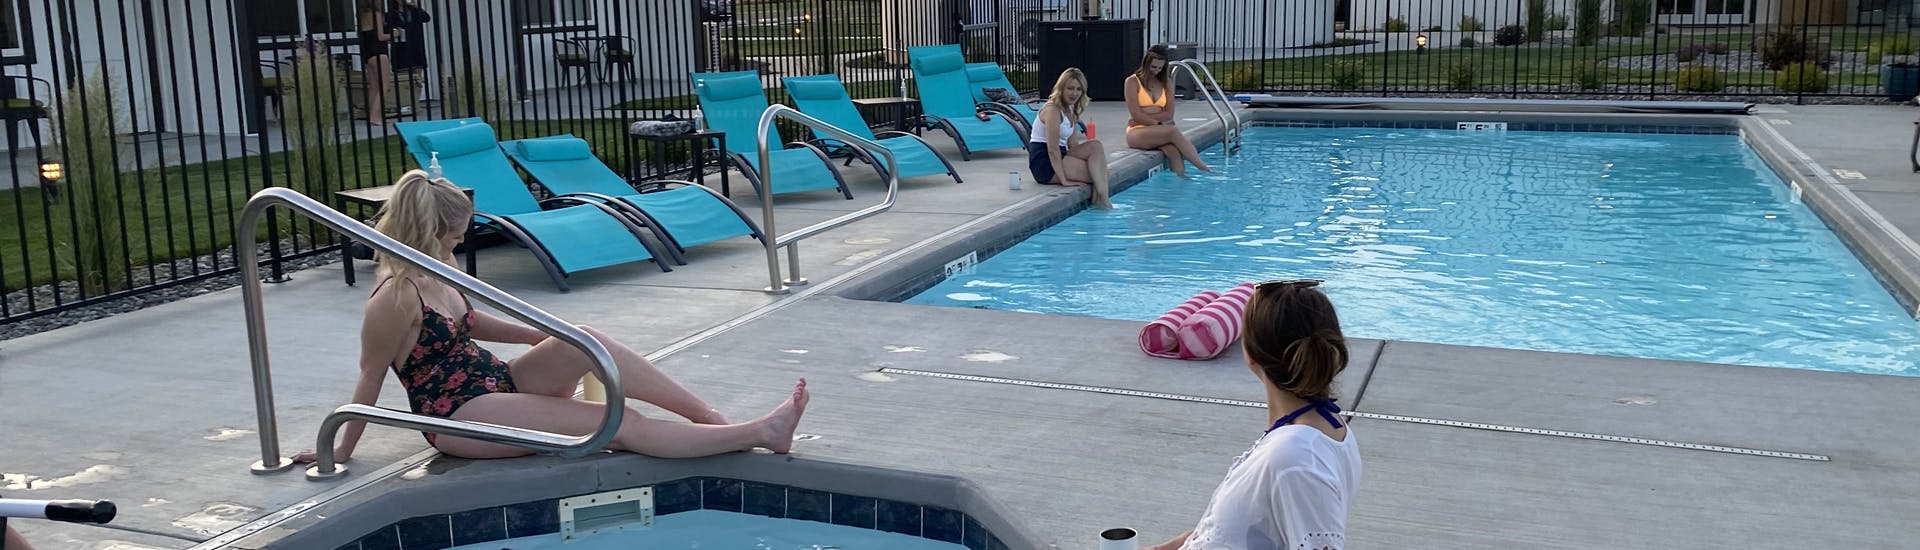 Men and woman sitting around and in a square pool and round hot tub